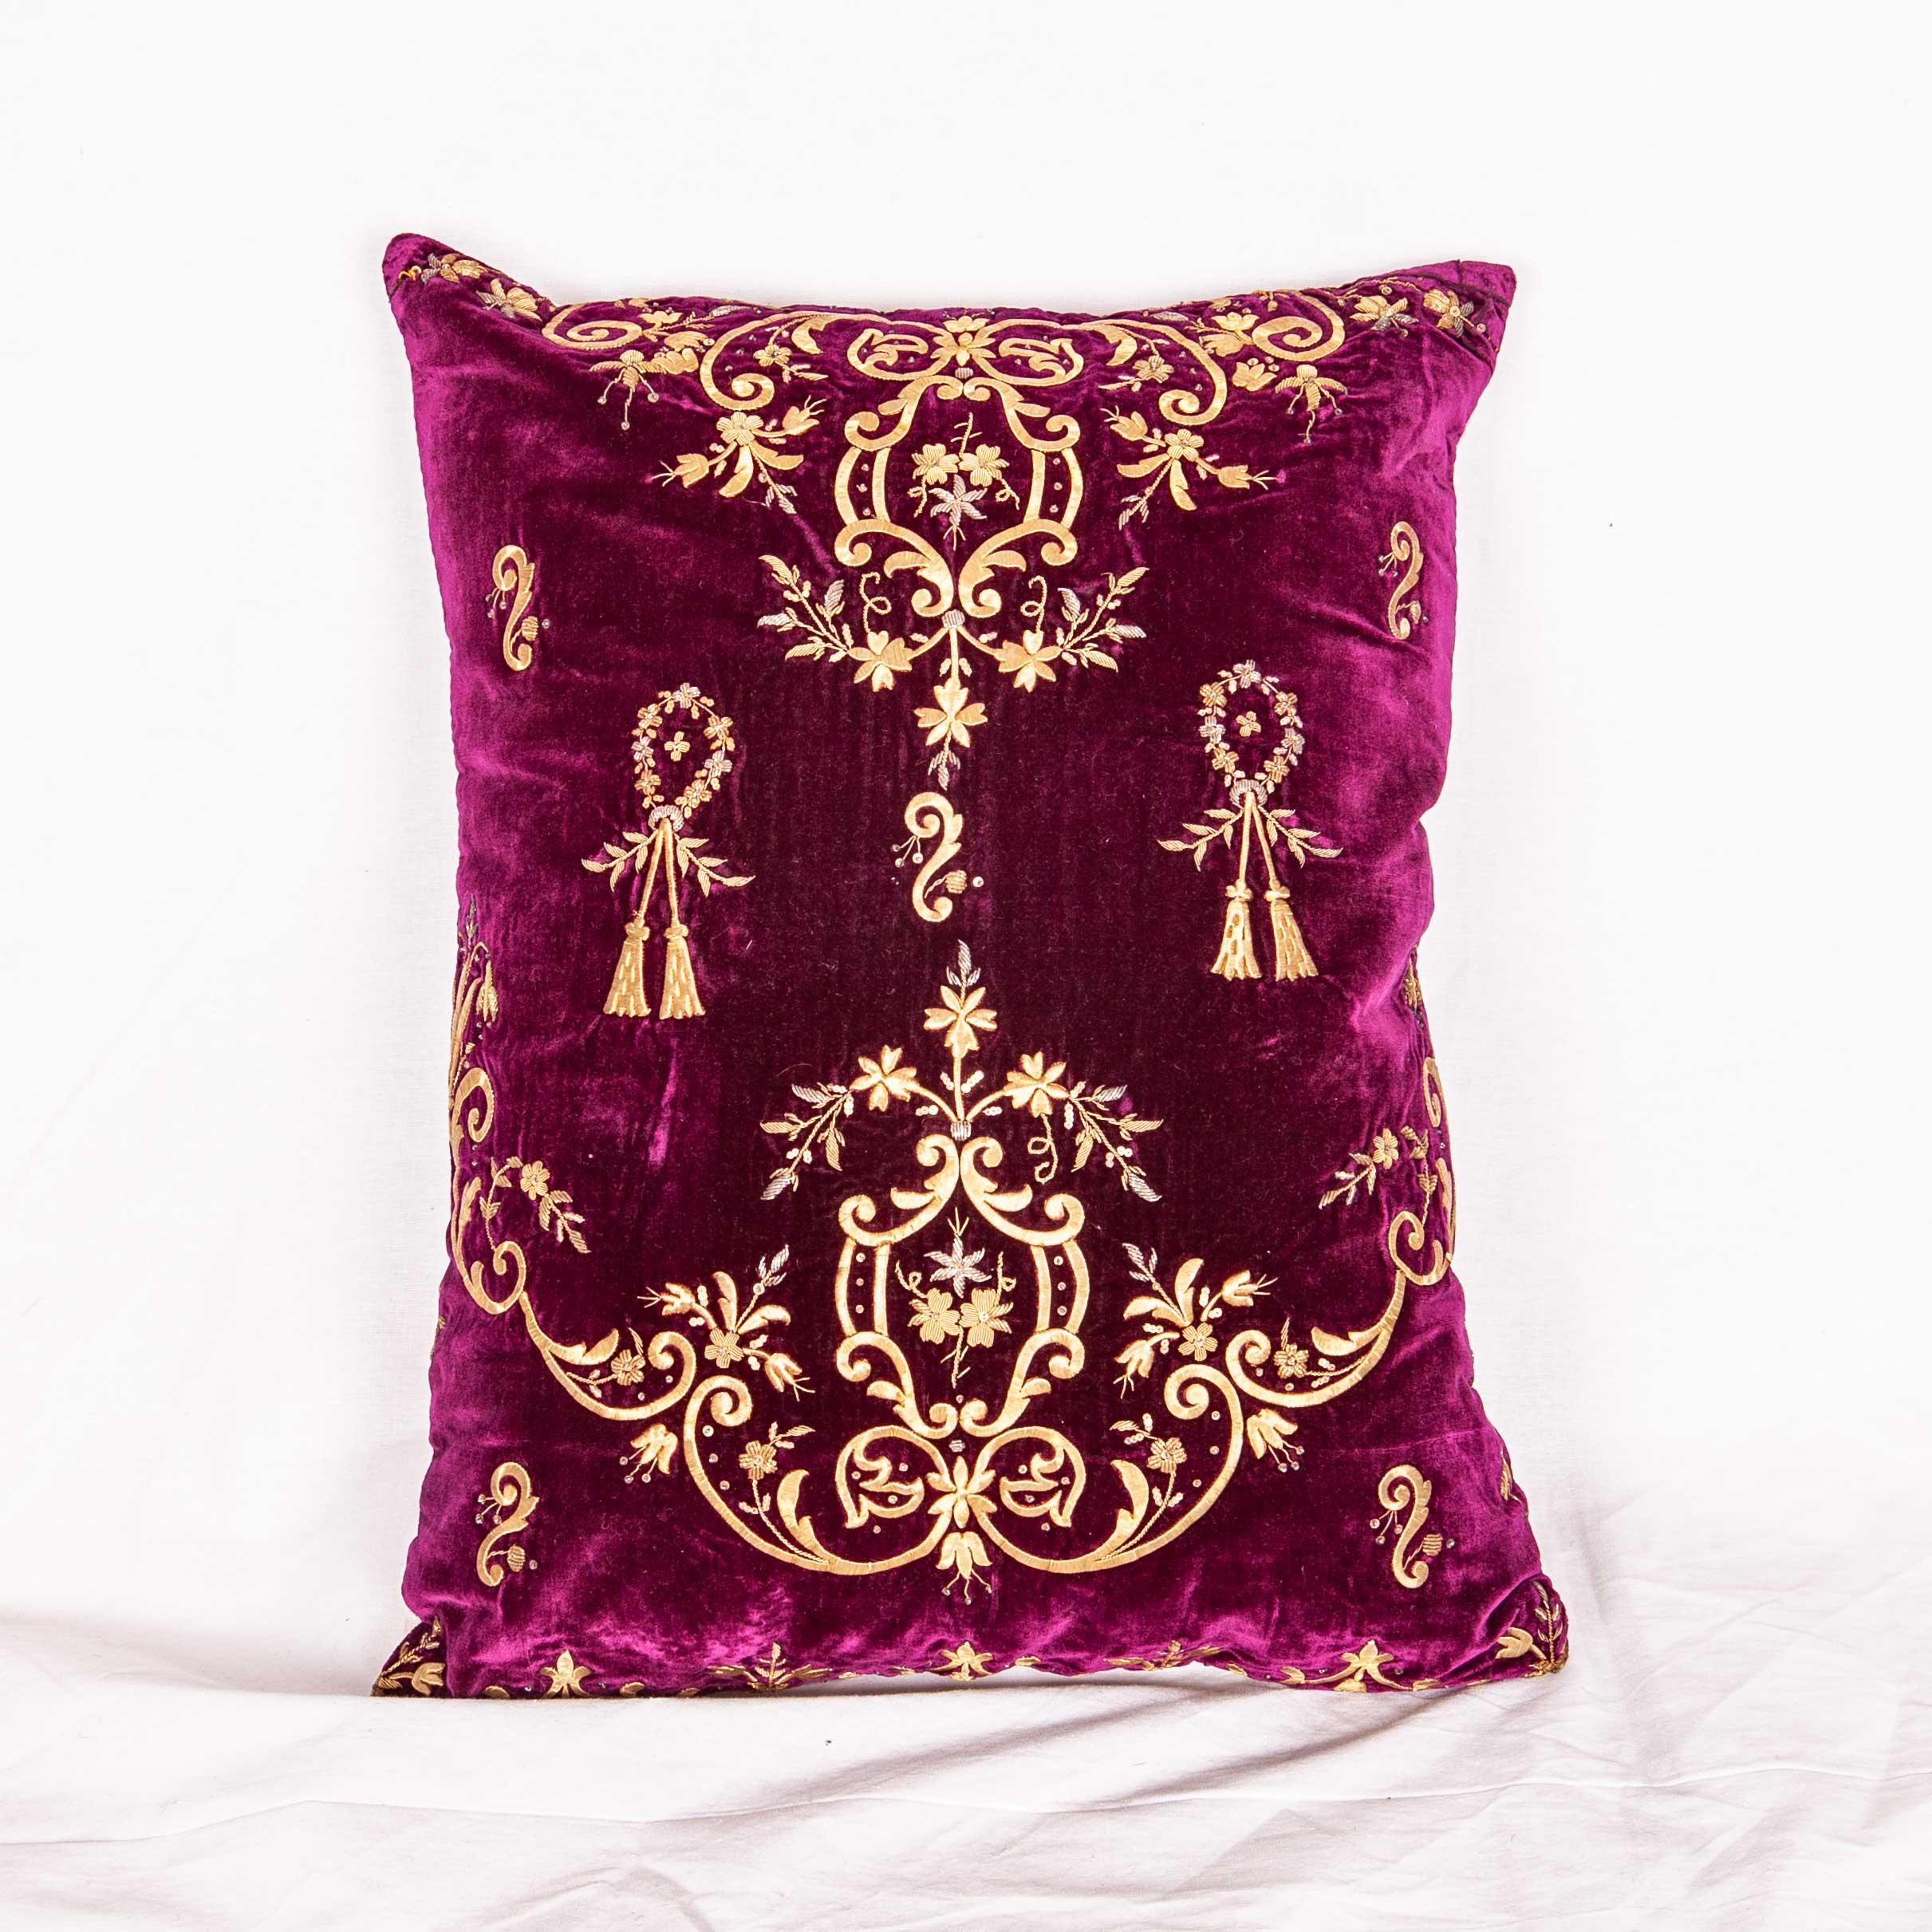 Suzani Antique Pillow case / Cushion Cover Fashioned from Ottoman Embroidery